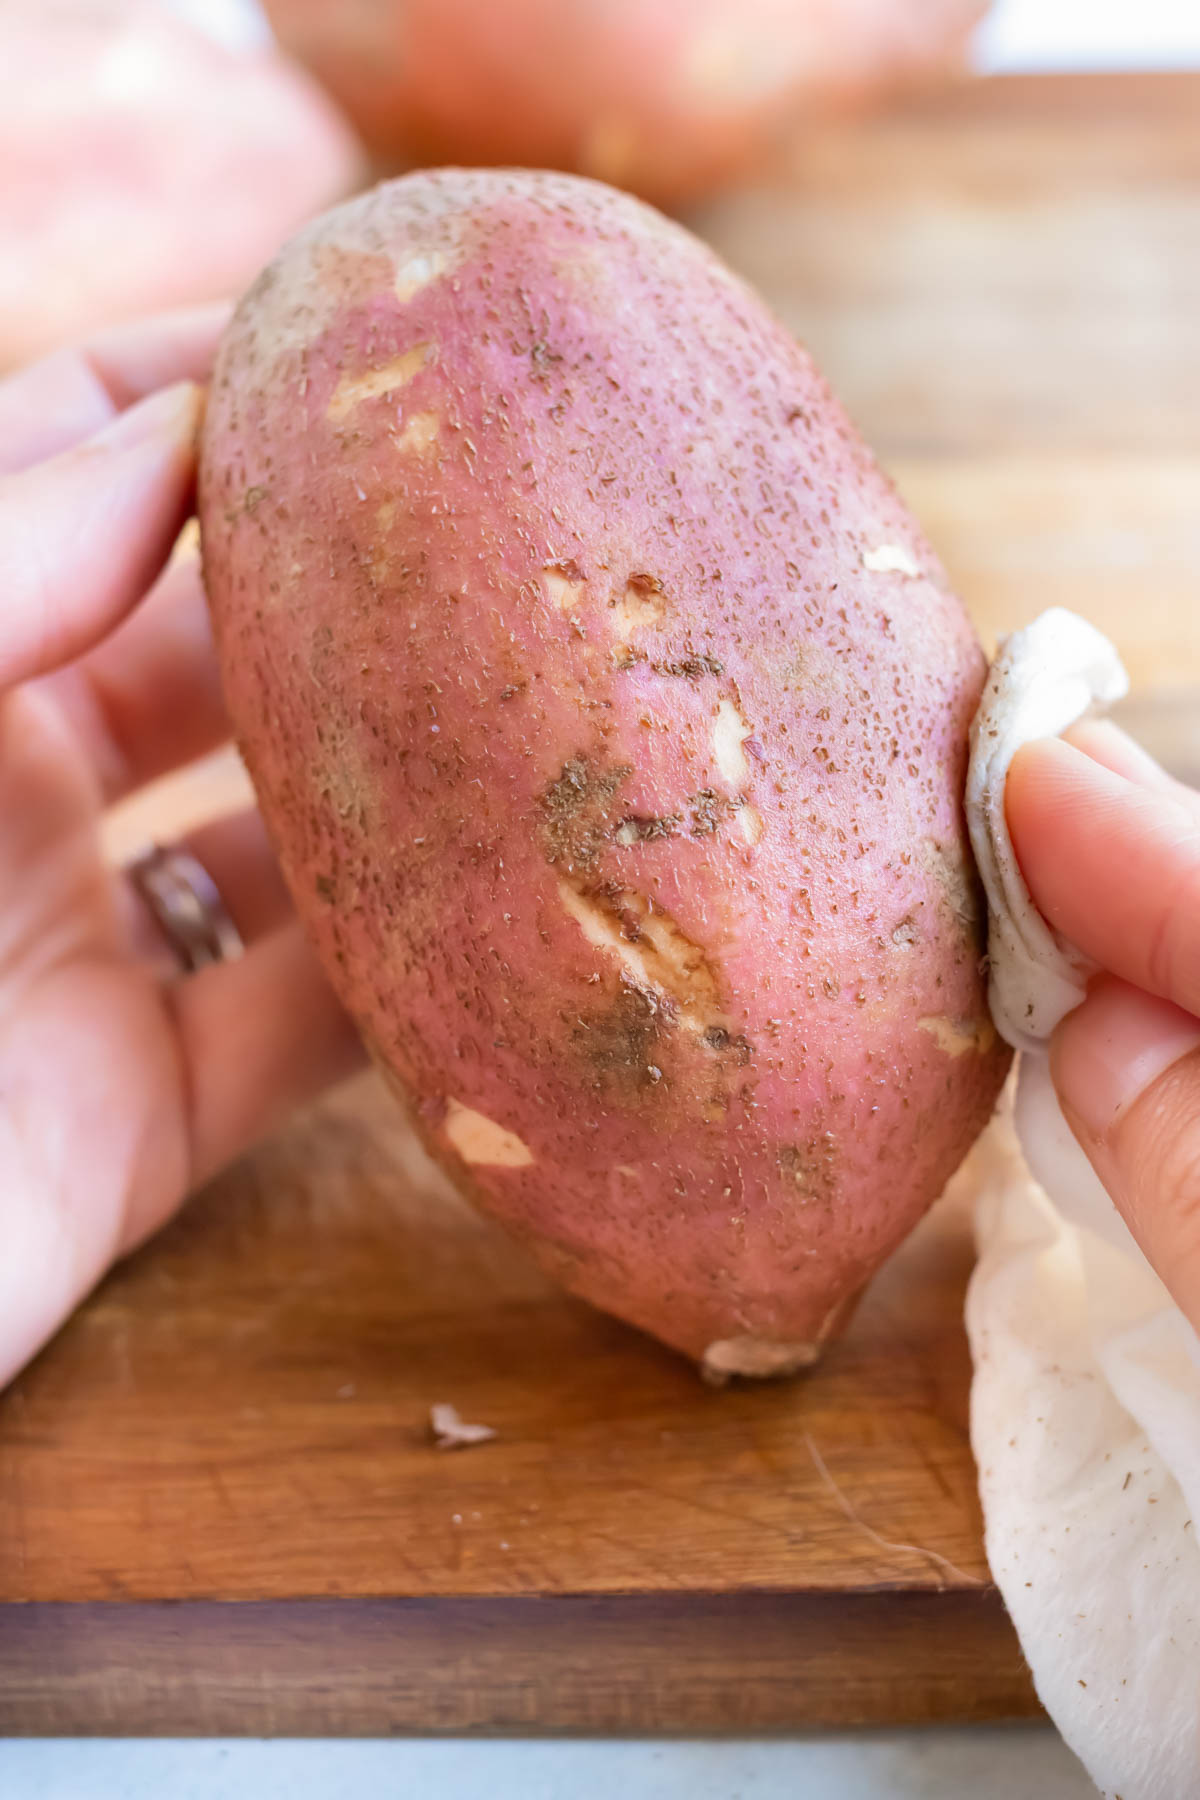 Sweet potatoes are washed for this side dish recipe.